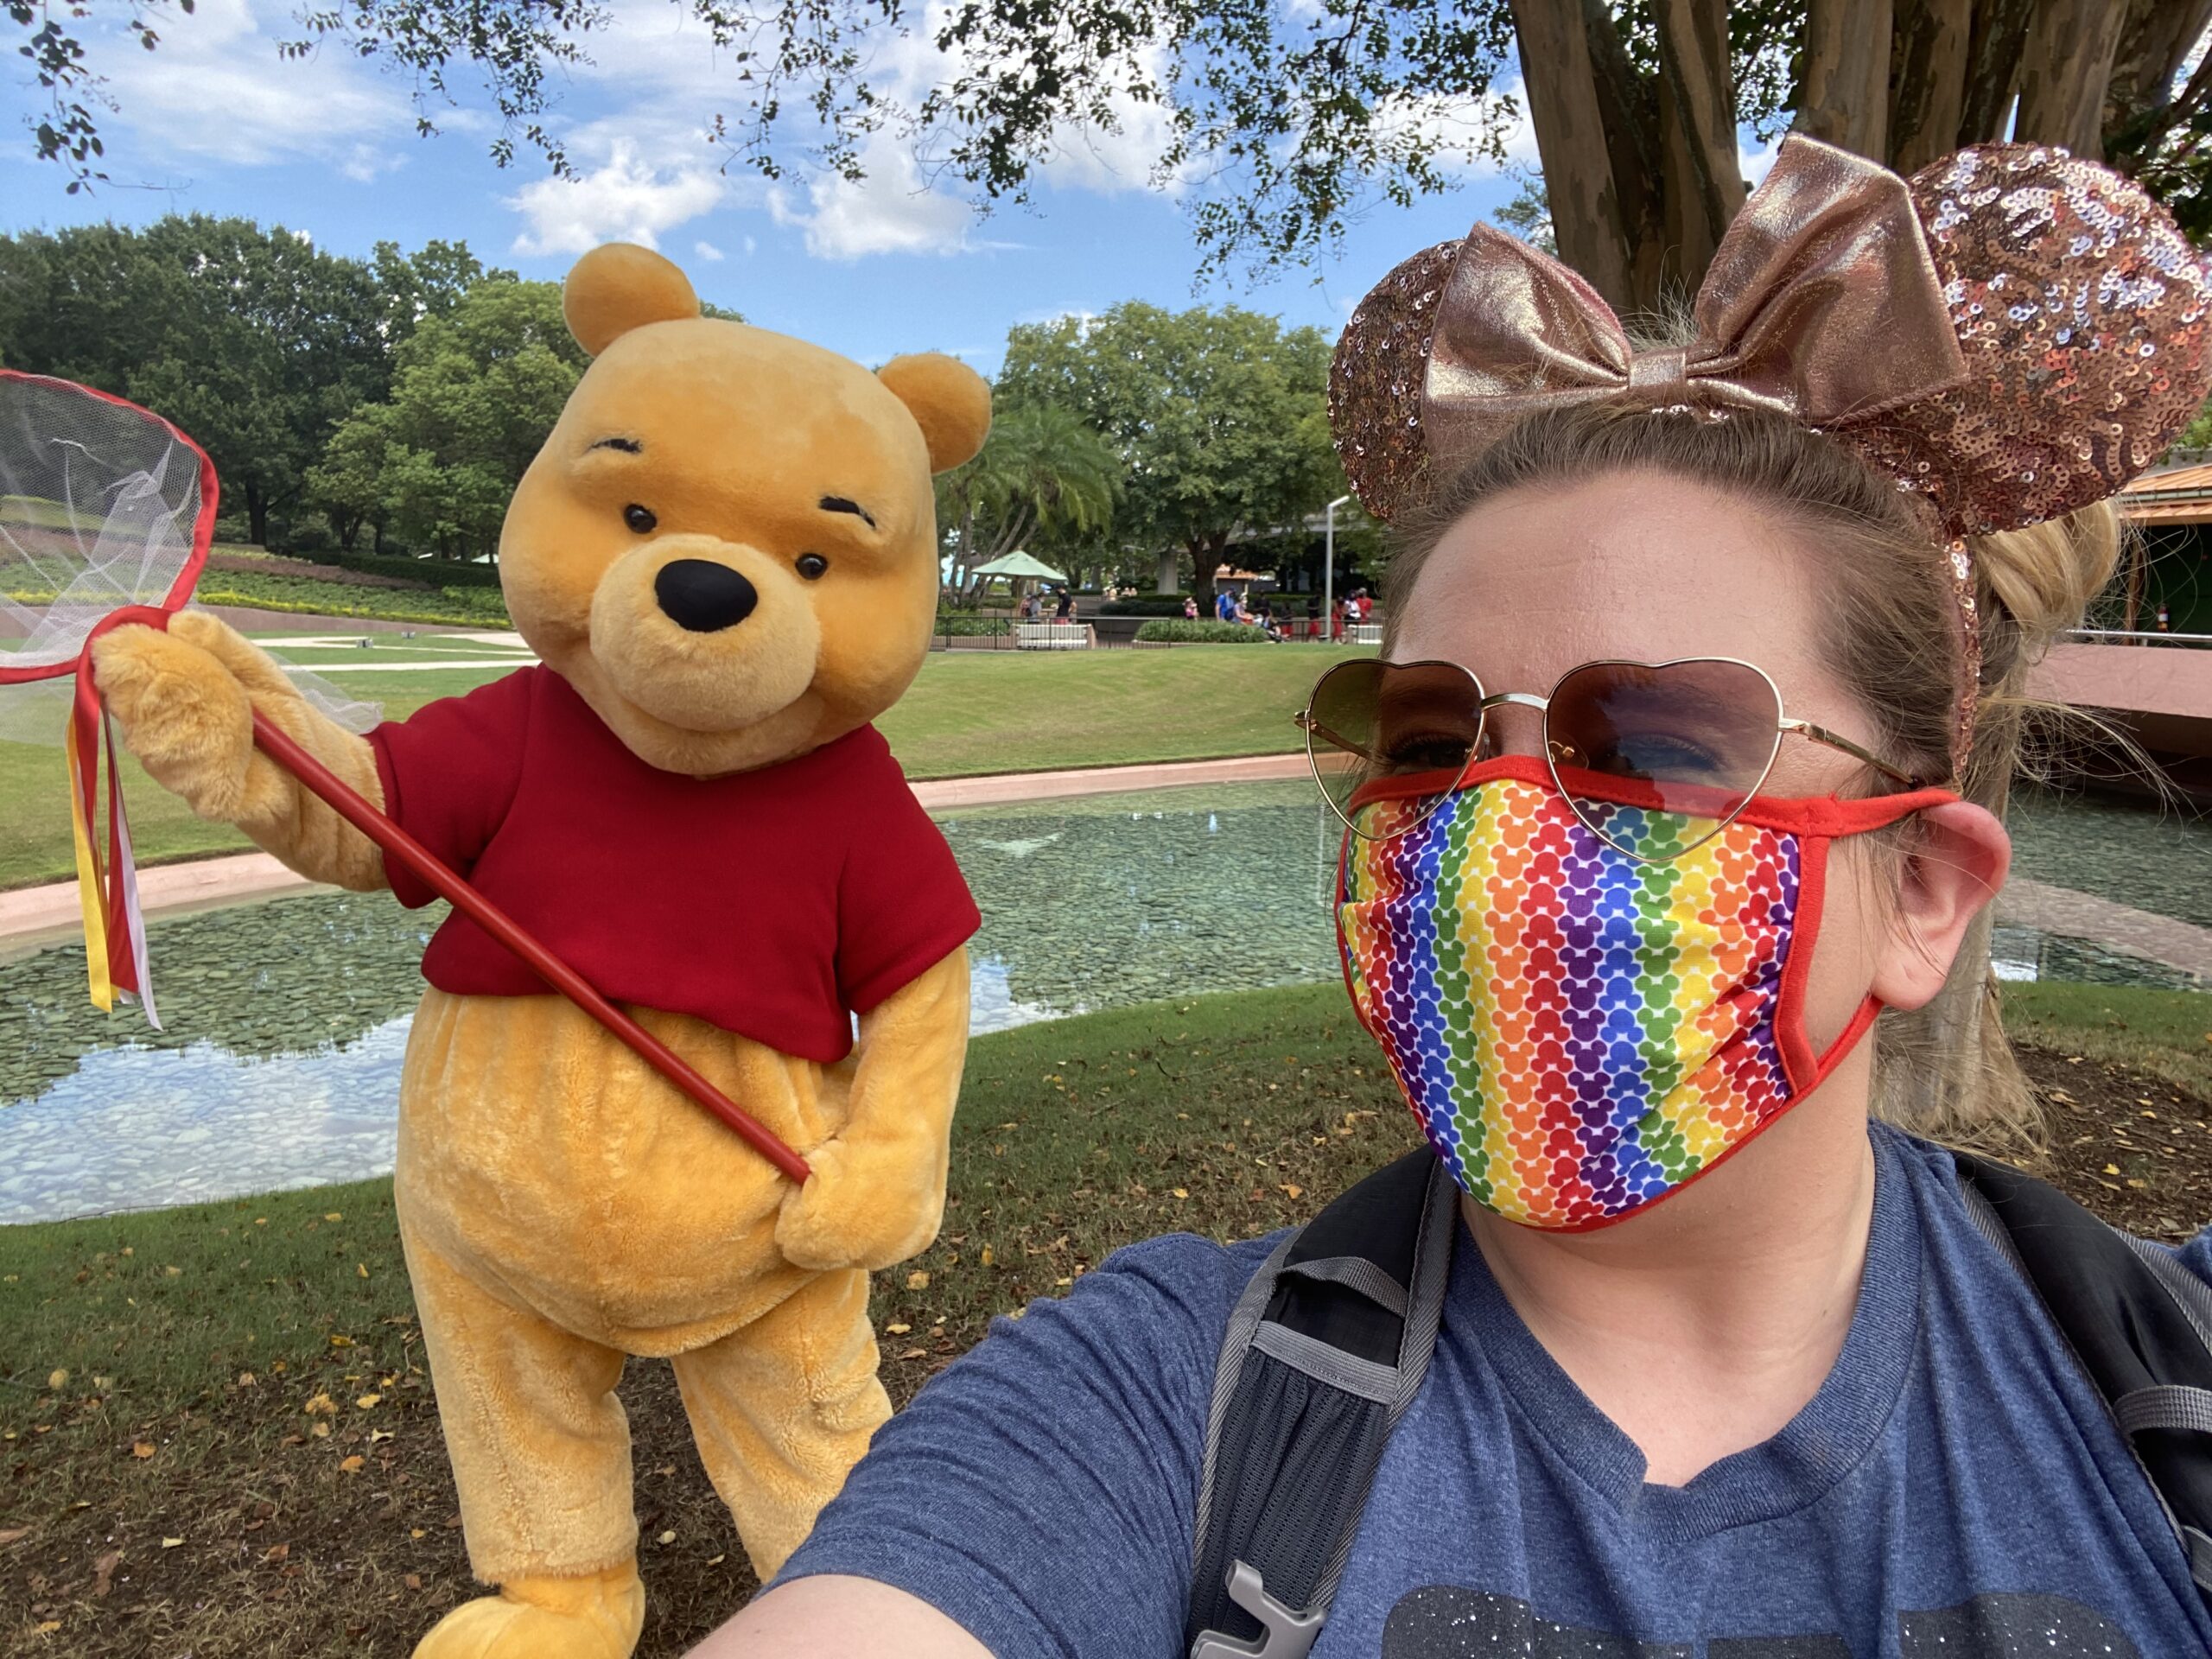 https://theparkprodigy.com/wp-content/uploads/2022/10/Winnie-the-Pooh-EPCOT-scaled.jpeg